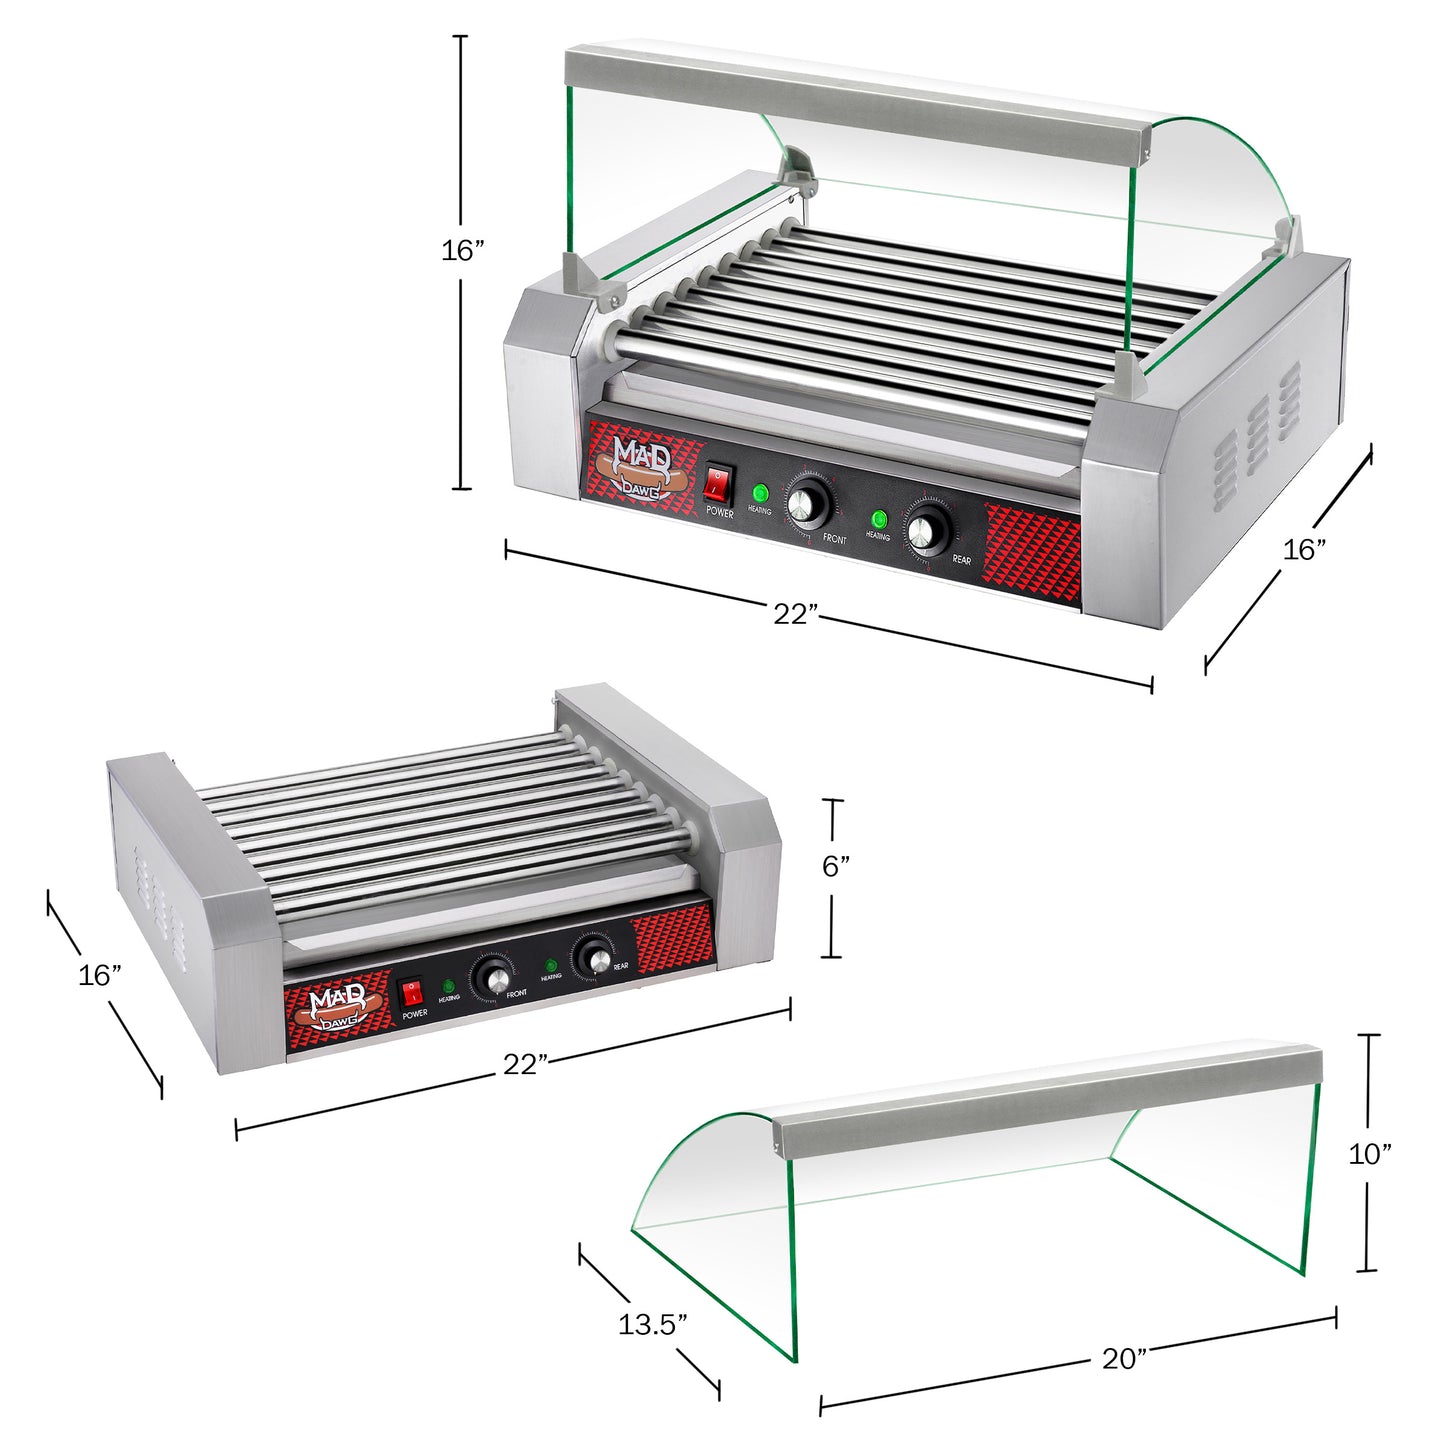 24 Hot Dog 9 Roll Hot Dog Machine with Tempered Glass Cover